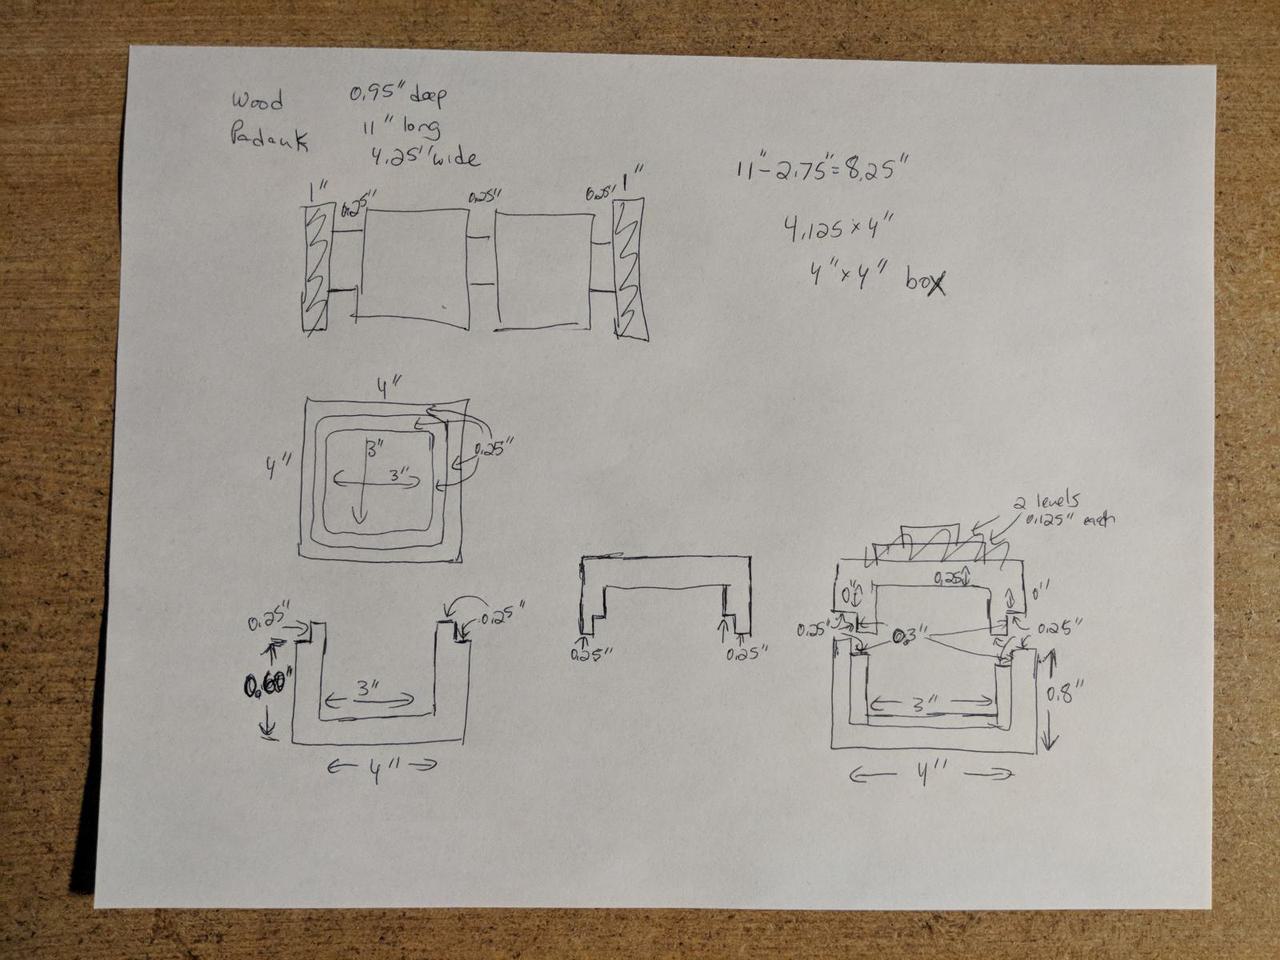 second attempt at a design diagram for how to use the wood.